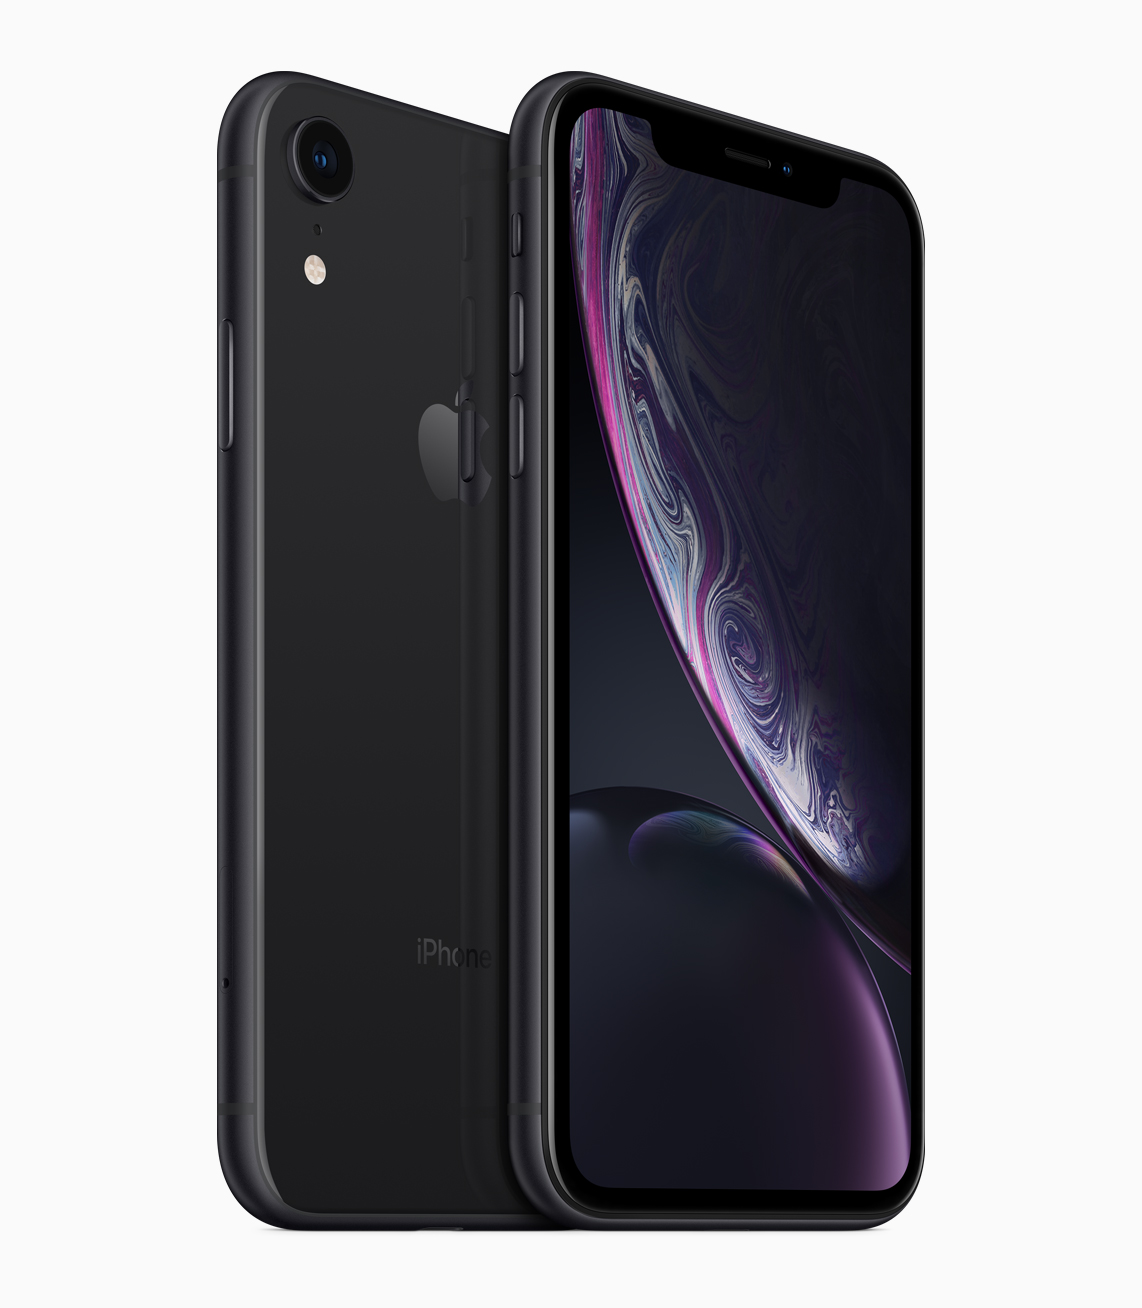 Apple Introduces New 6.1-inch iPhone XR Starting at $749